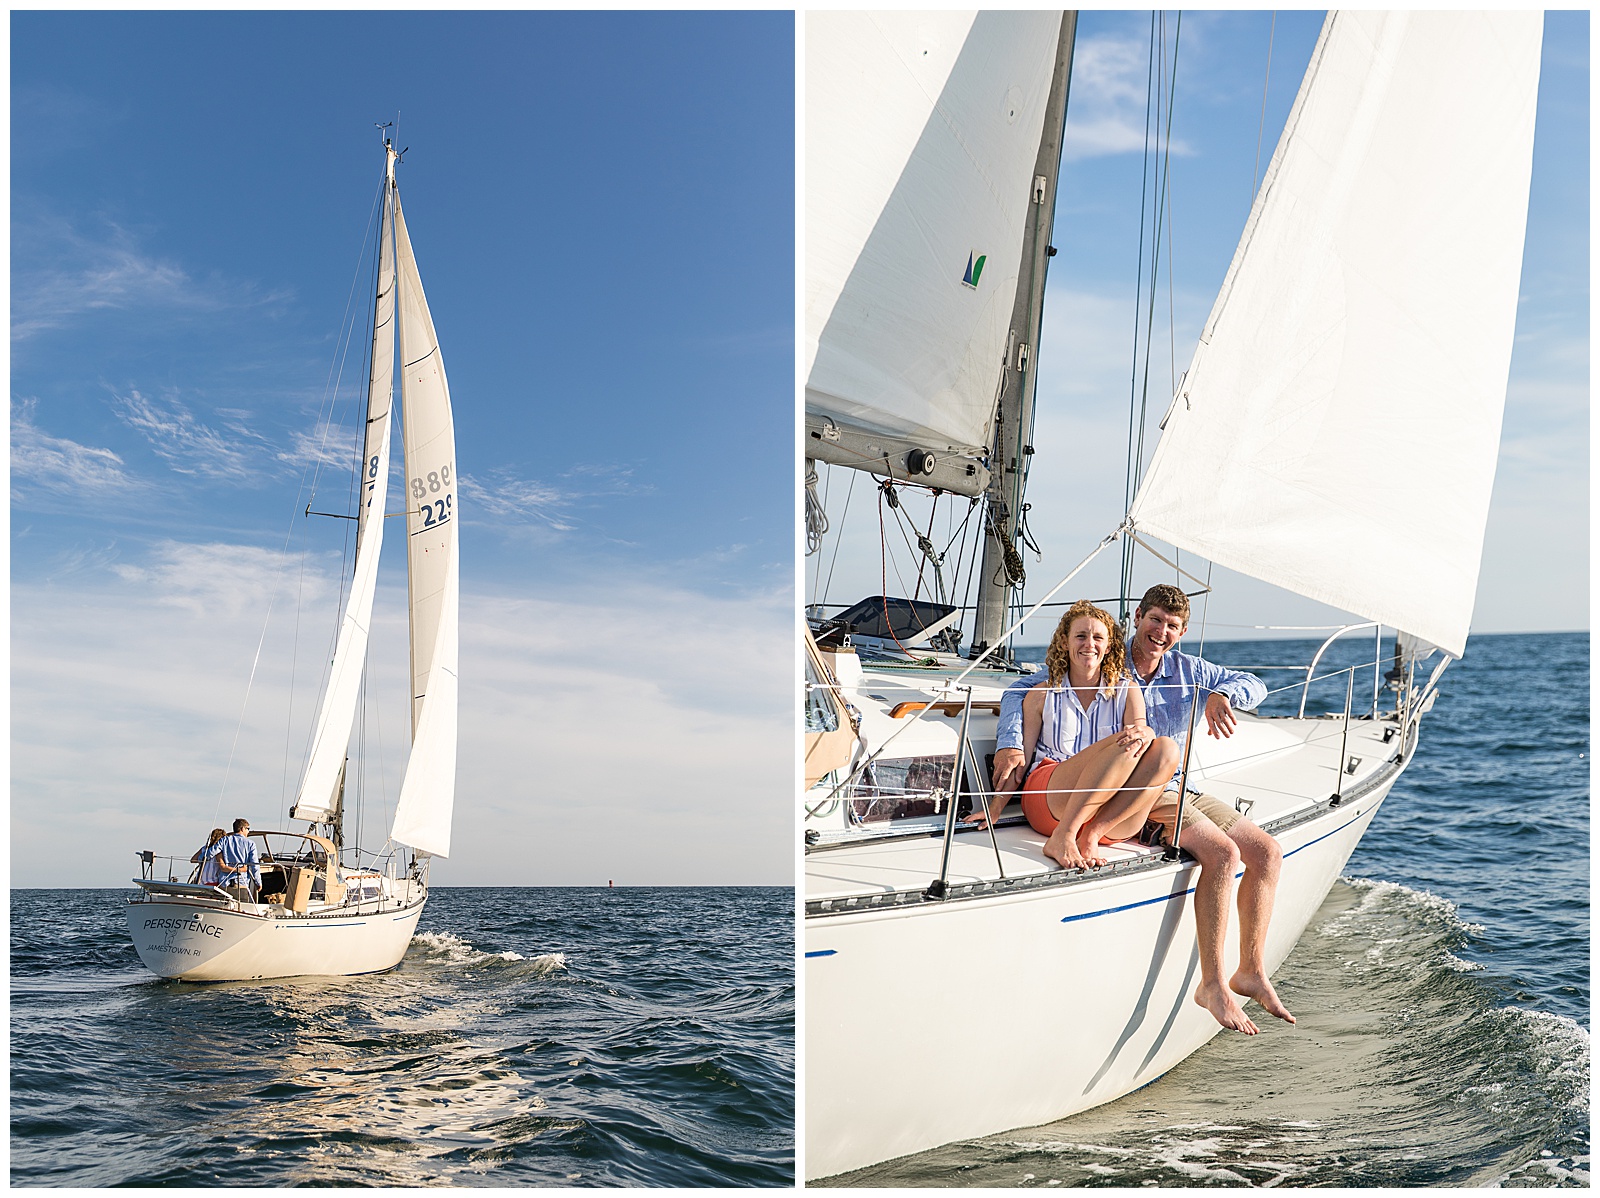 Nautical Engagement Session on couple's sailboat in Jamestown, RI